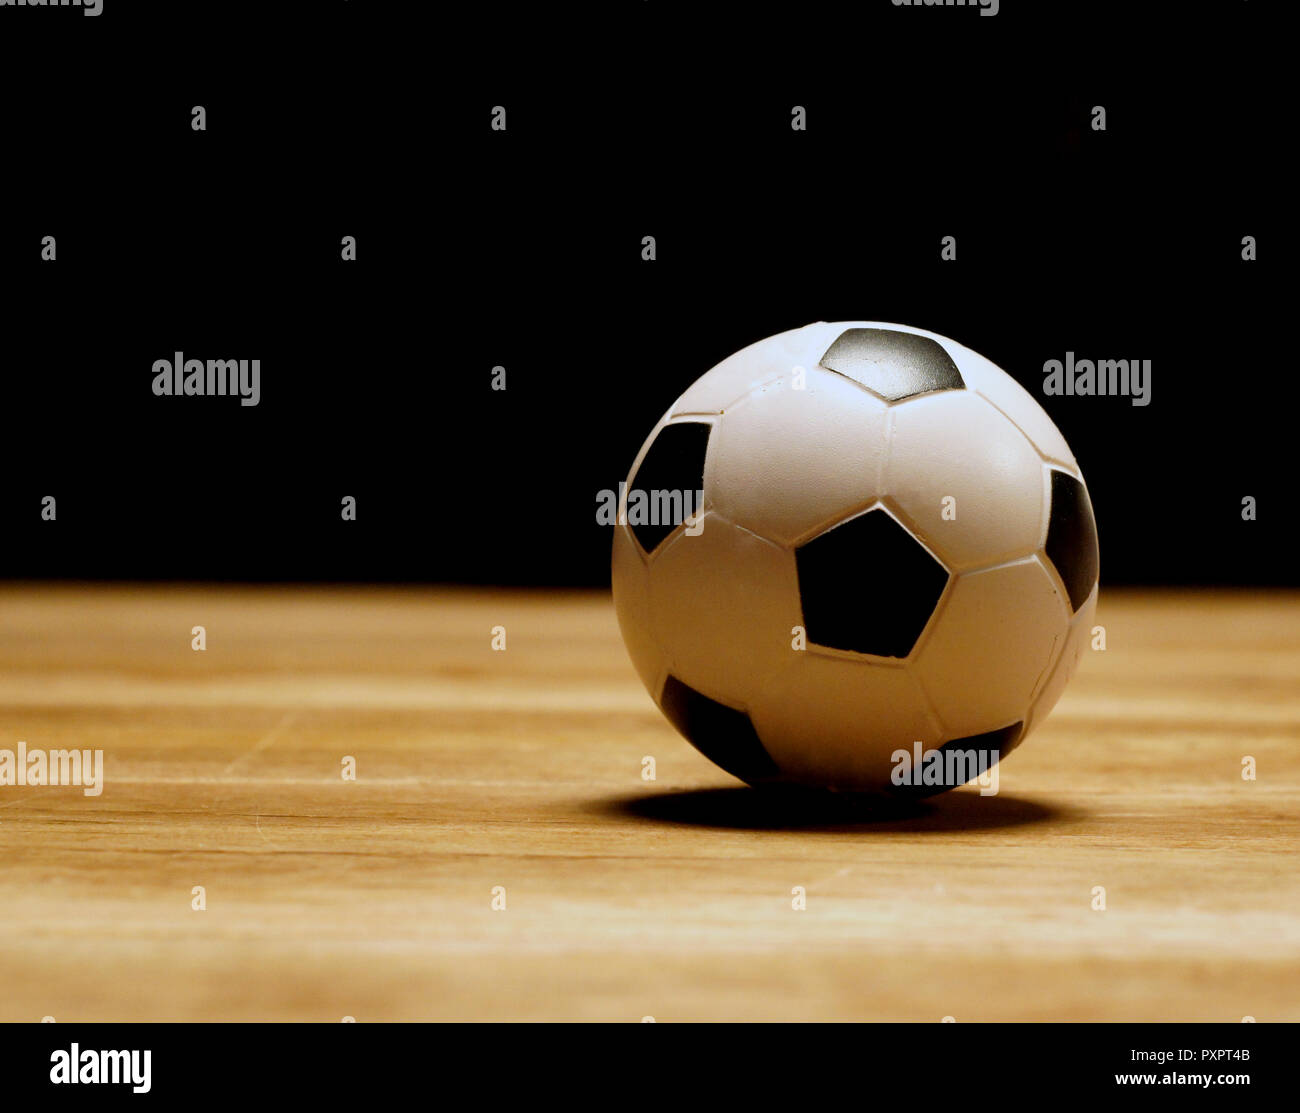 white and black mini football at wooden table Stock Photo